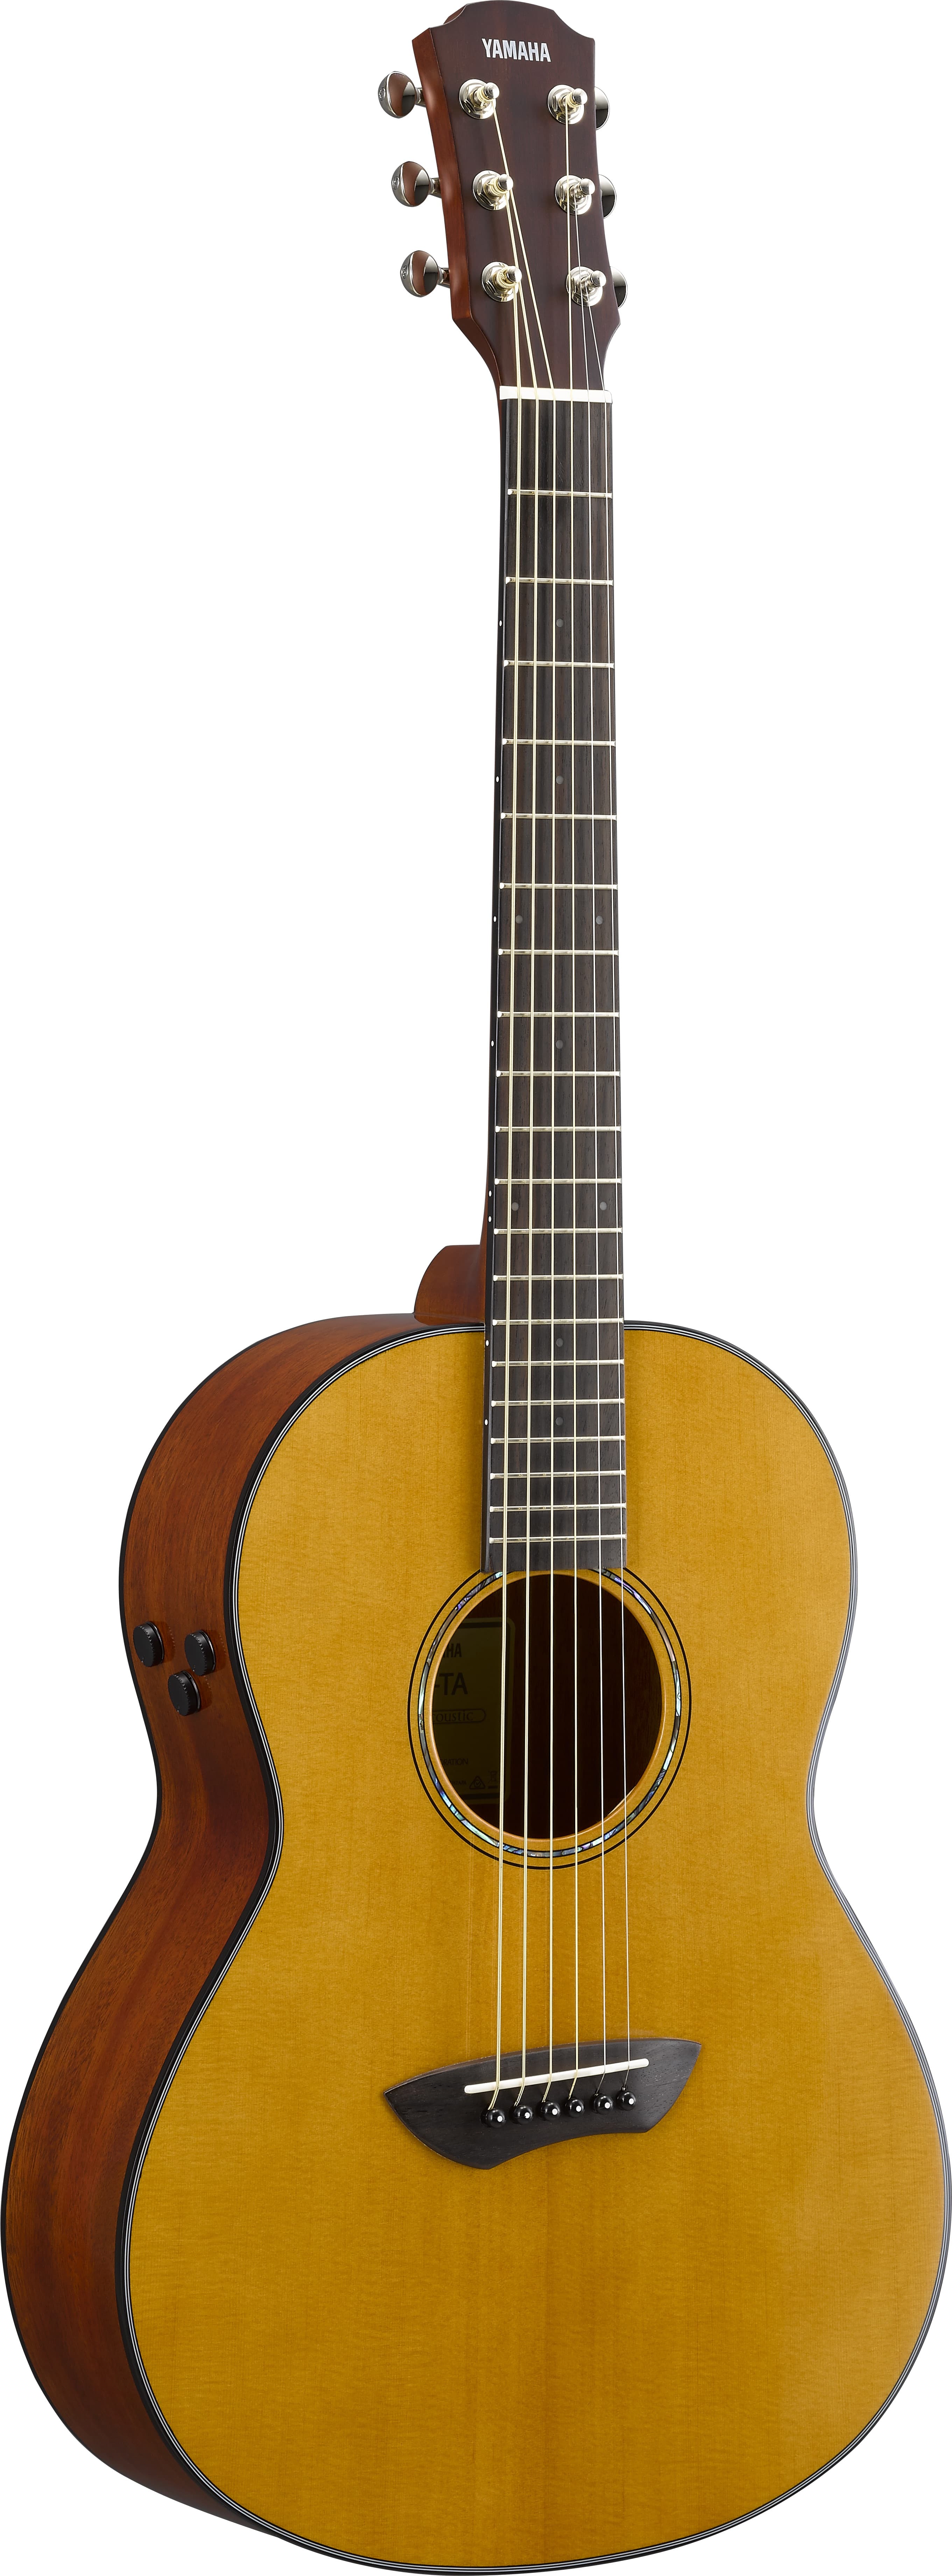 Yamaha CSF-TA Introduces TransAcoustic  Technology to Growing Family of Parlor Guitars